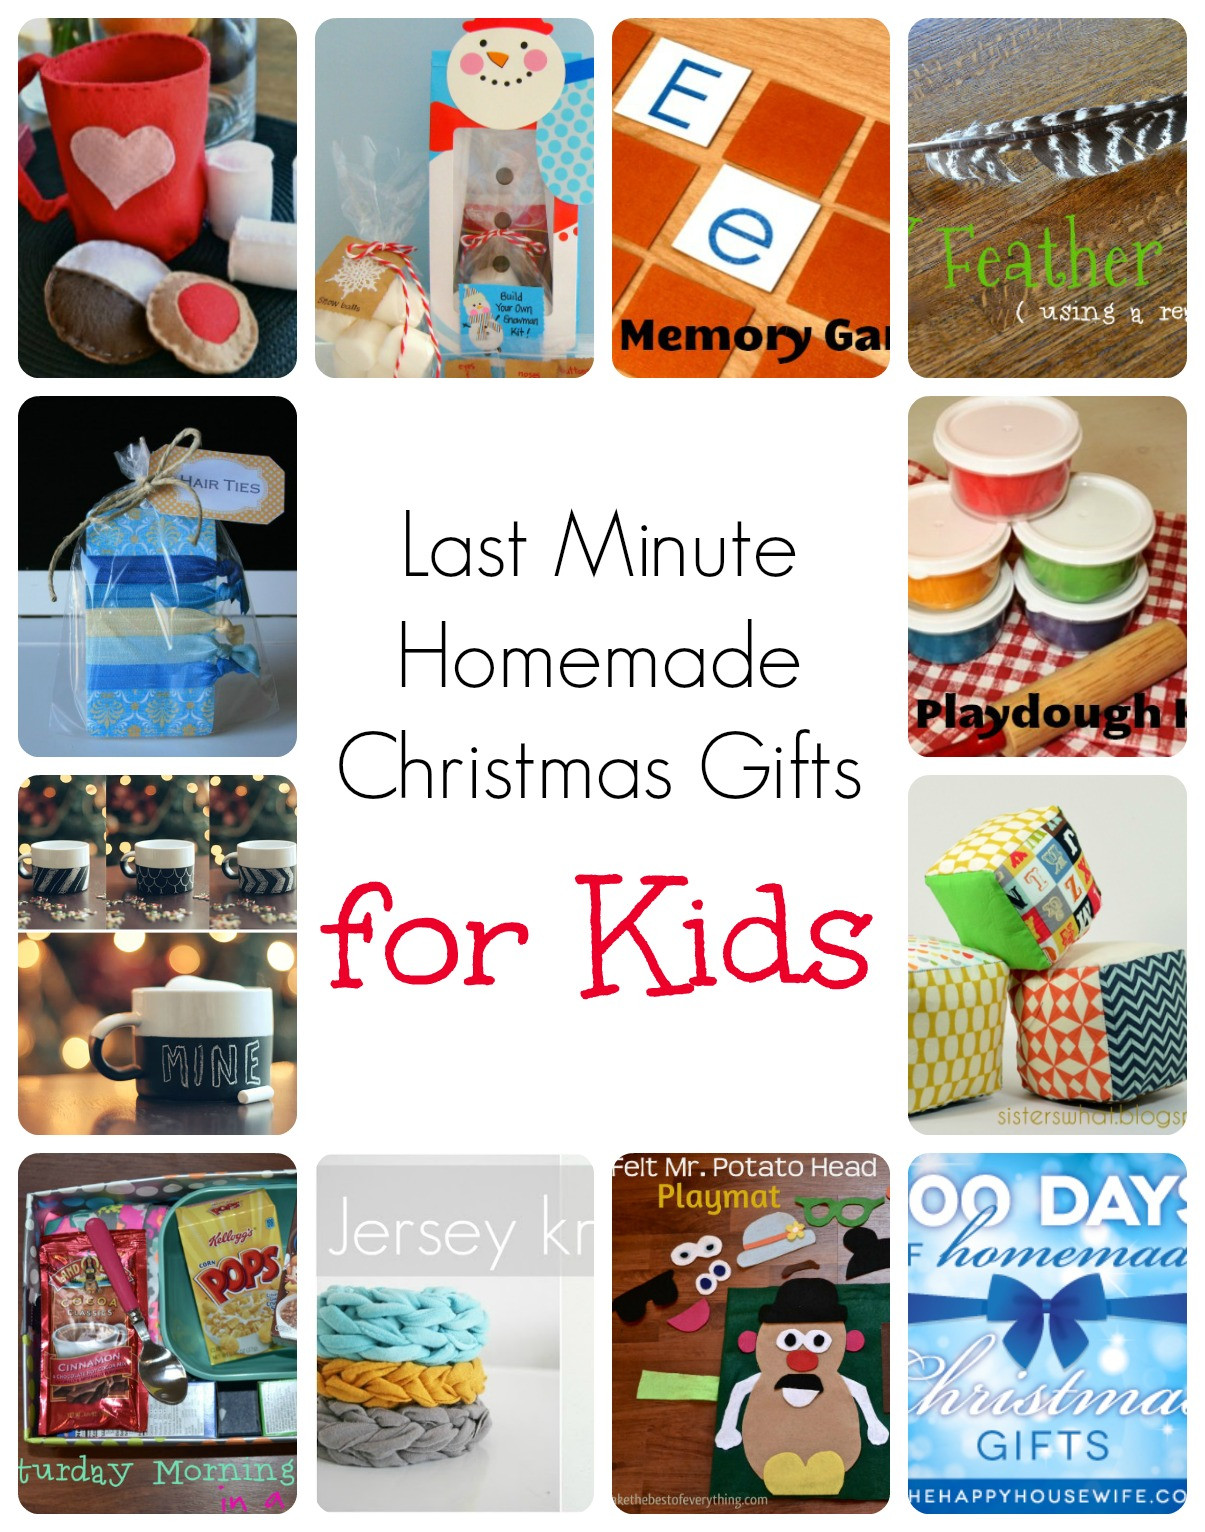 Last Minute DIY Christmas Gifts
 Last Minute Homemade Christmas Gifts for Kids The Happy